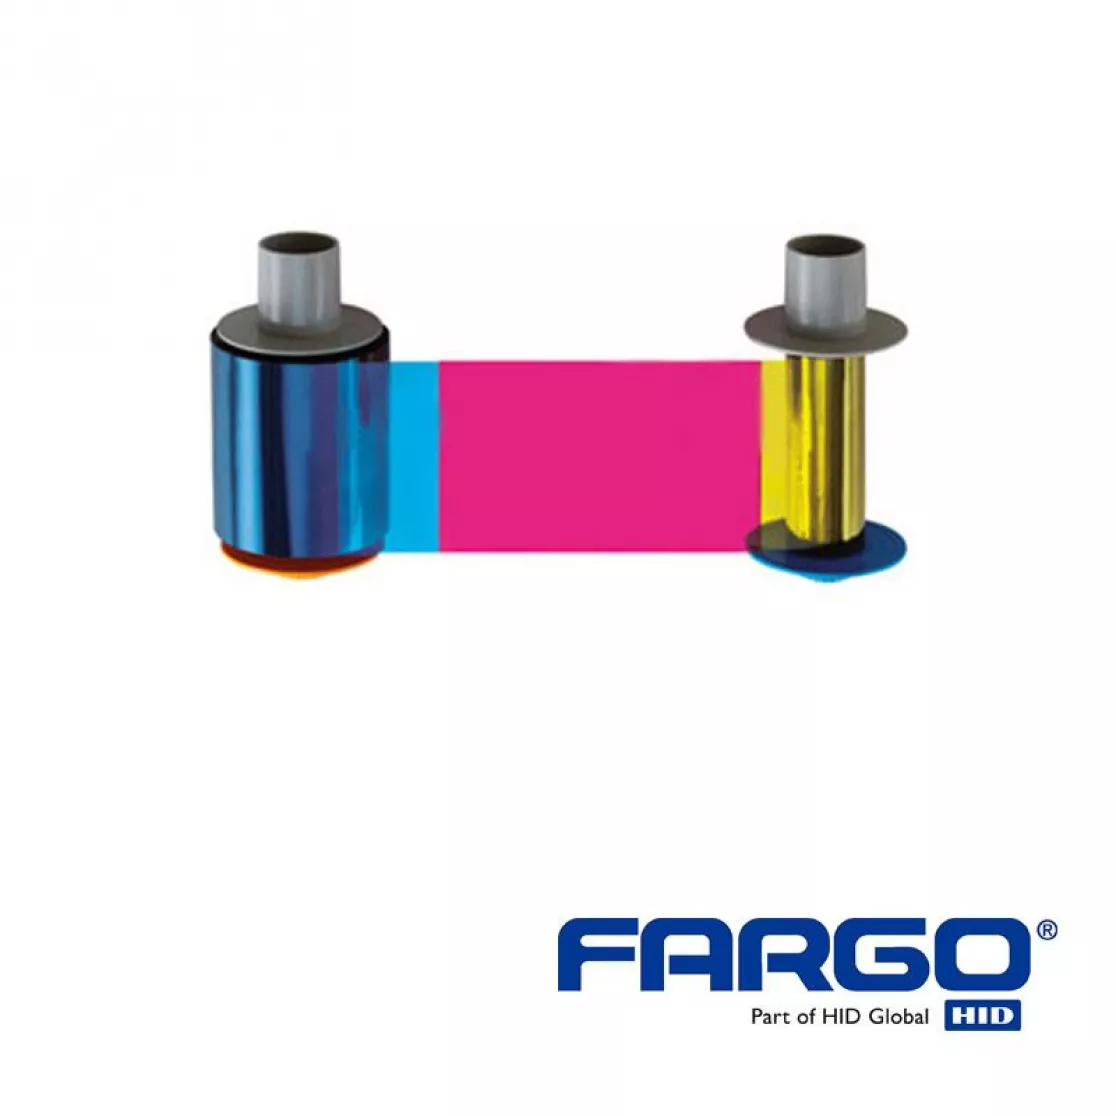 Ribbon colorful with UV for card printer HID Fargo HDP8500